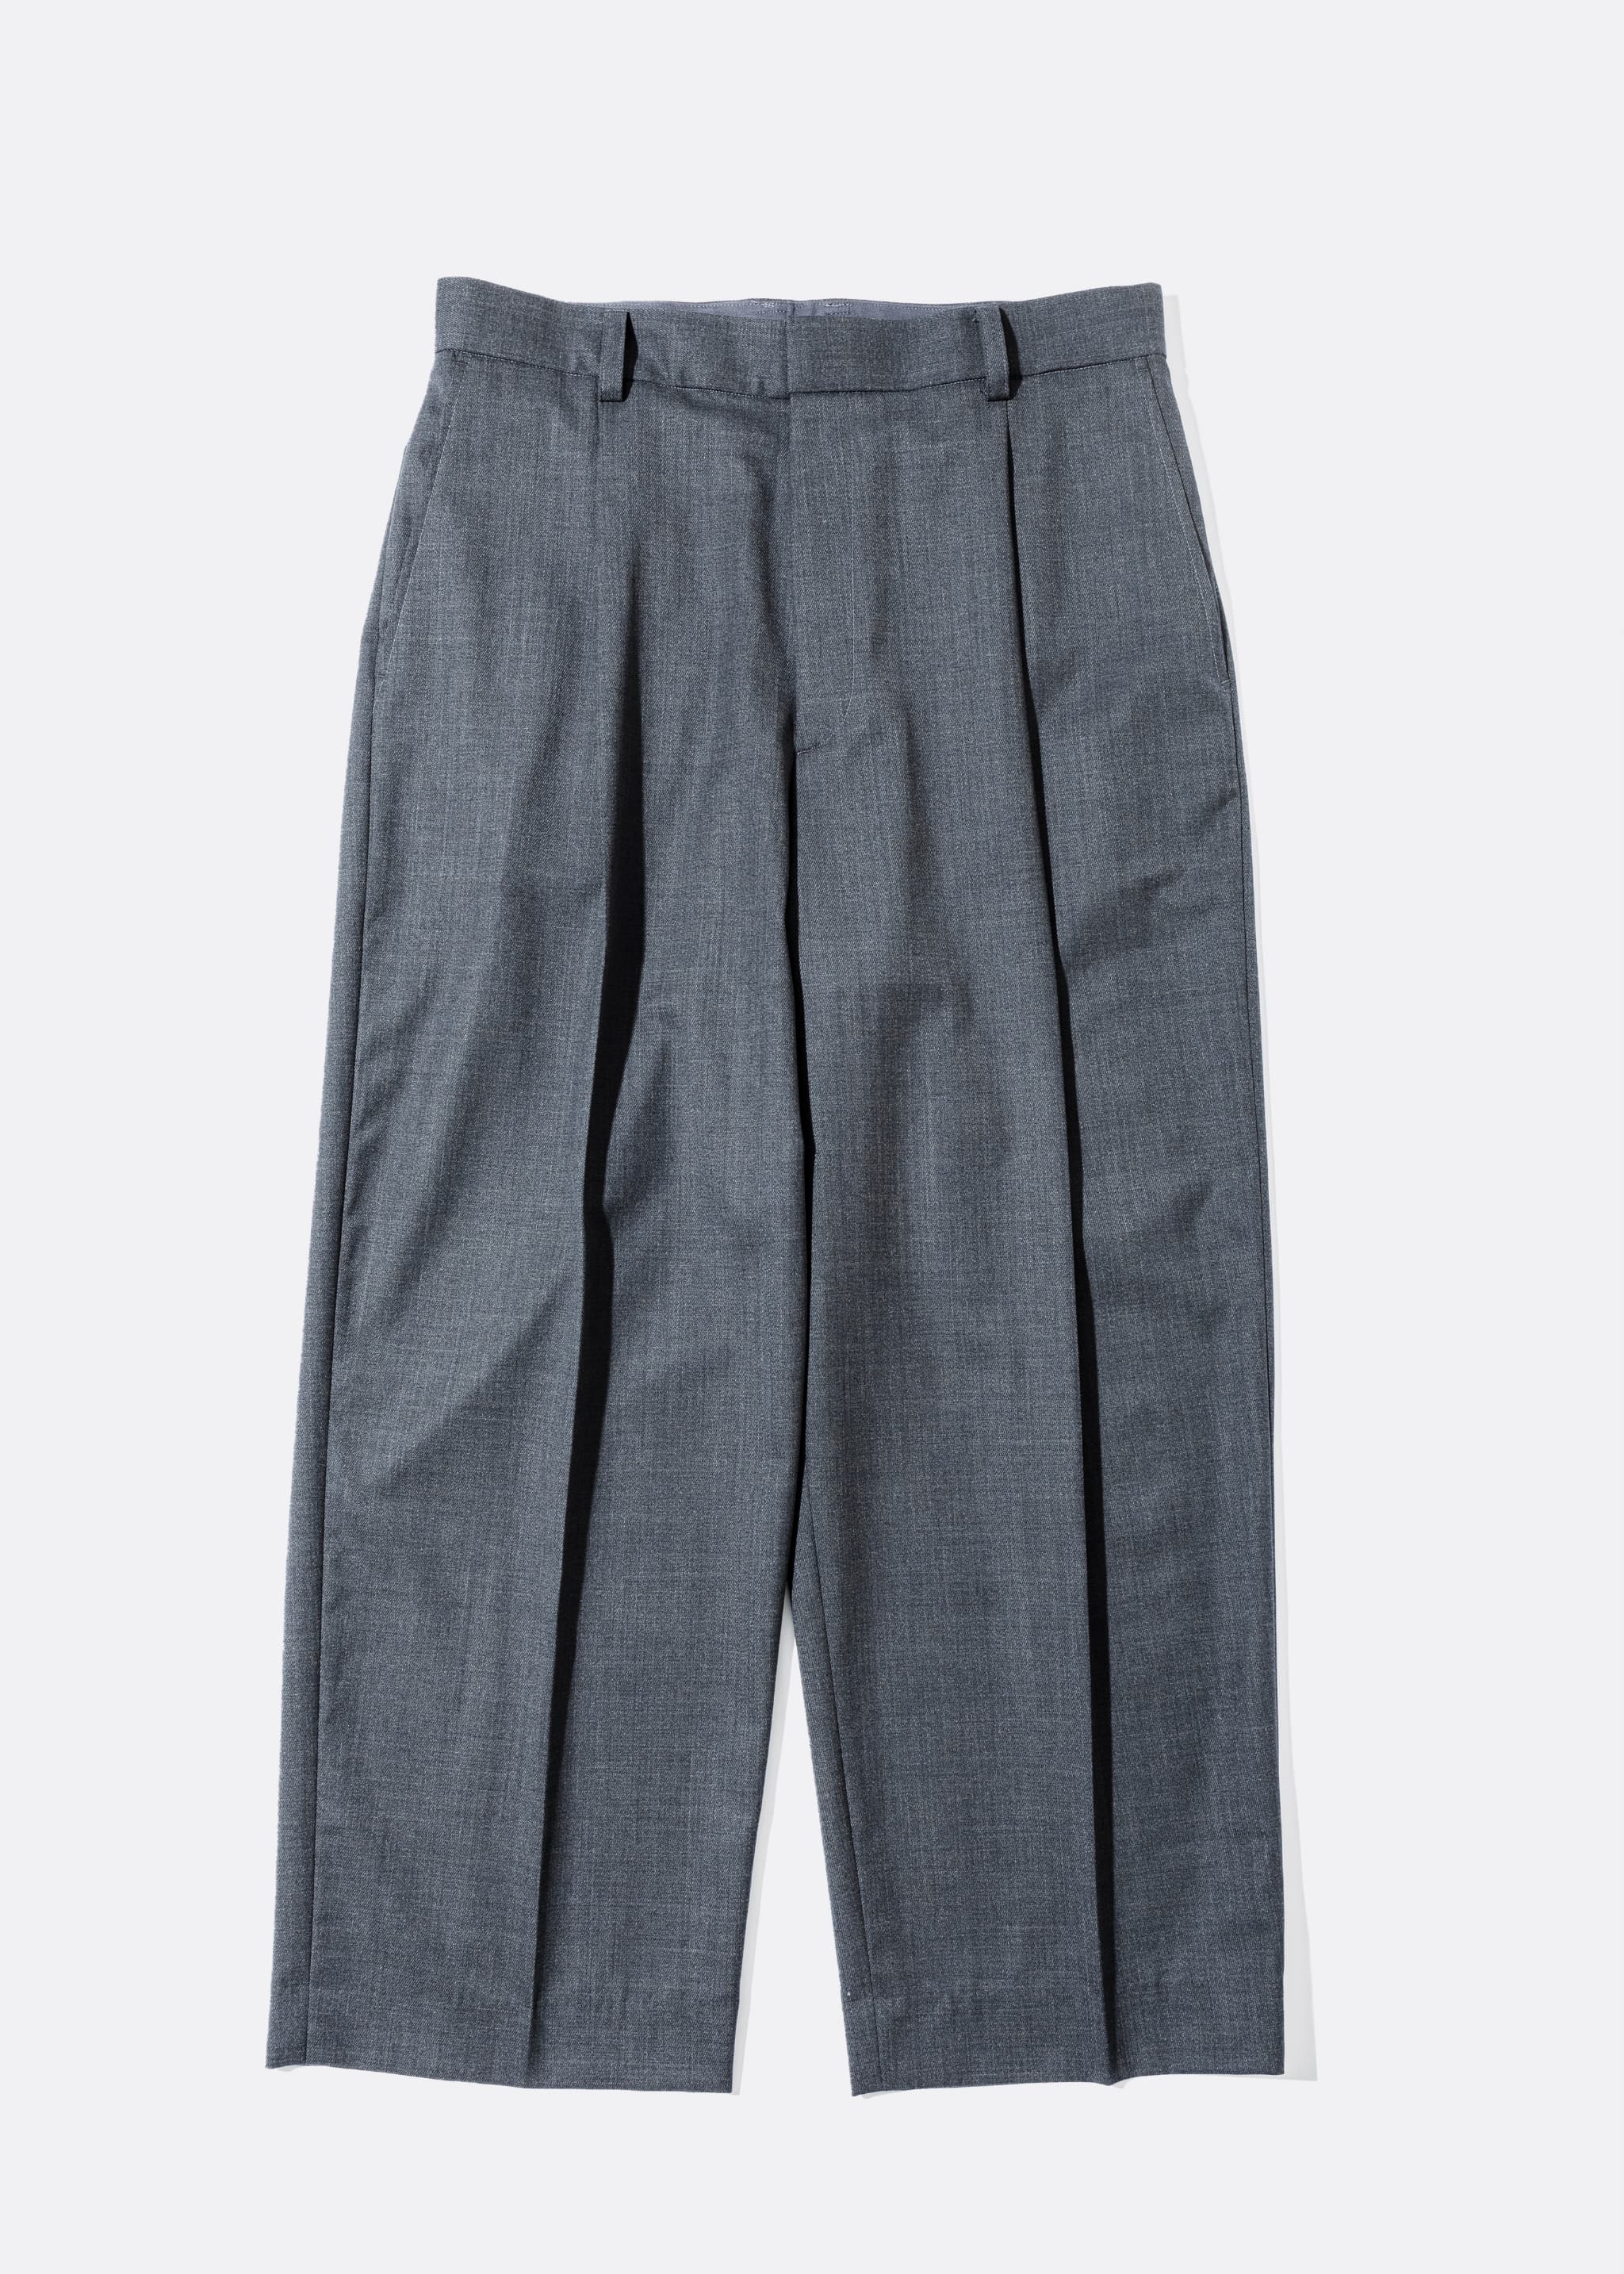 WOOL WIDE PANTS – THE DAY